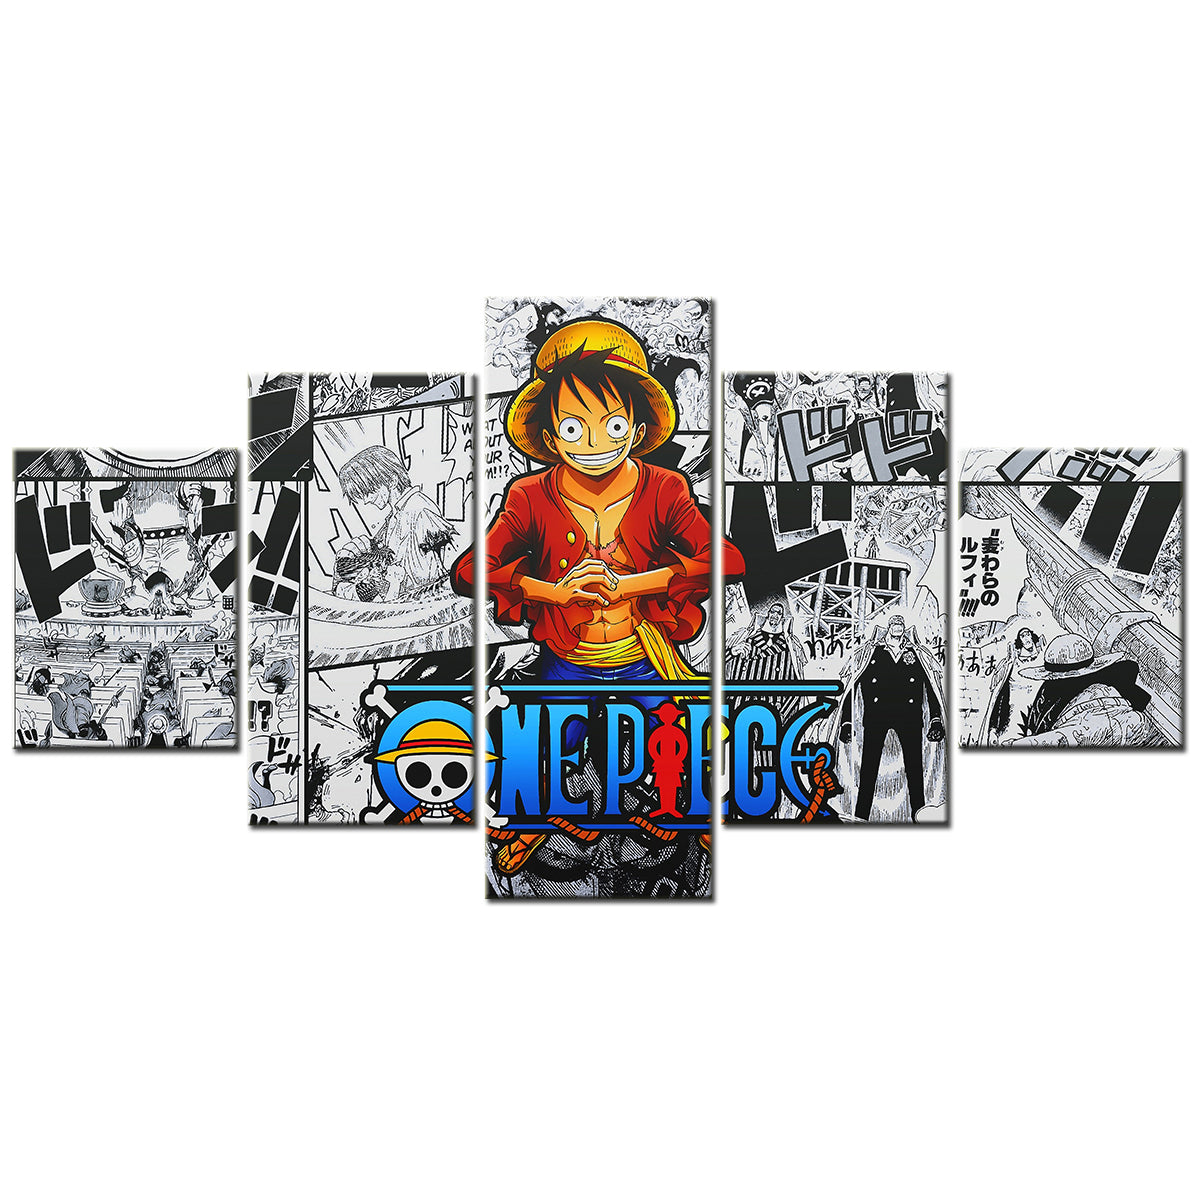 One Piece - 5 Pieces Wall Art - Monkey D. Luffy 7 - Printed Wall Pictures Home Decor - One Piece Poster - One Piece Canvas